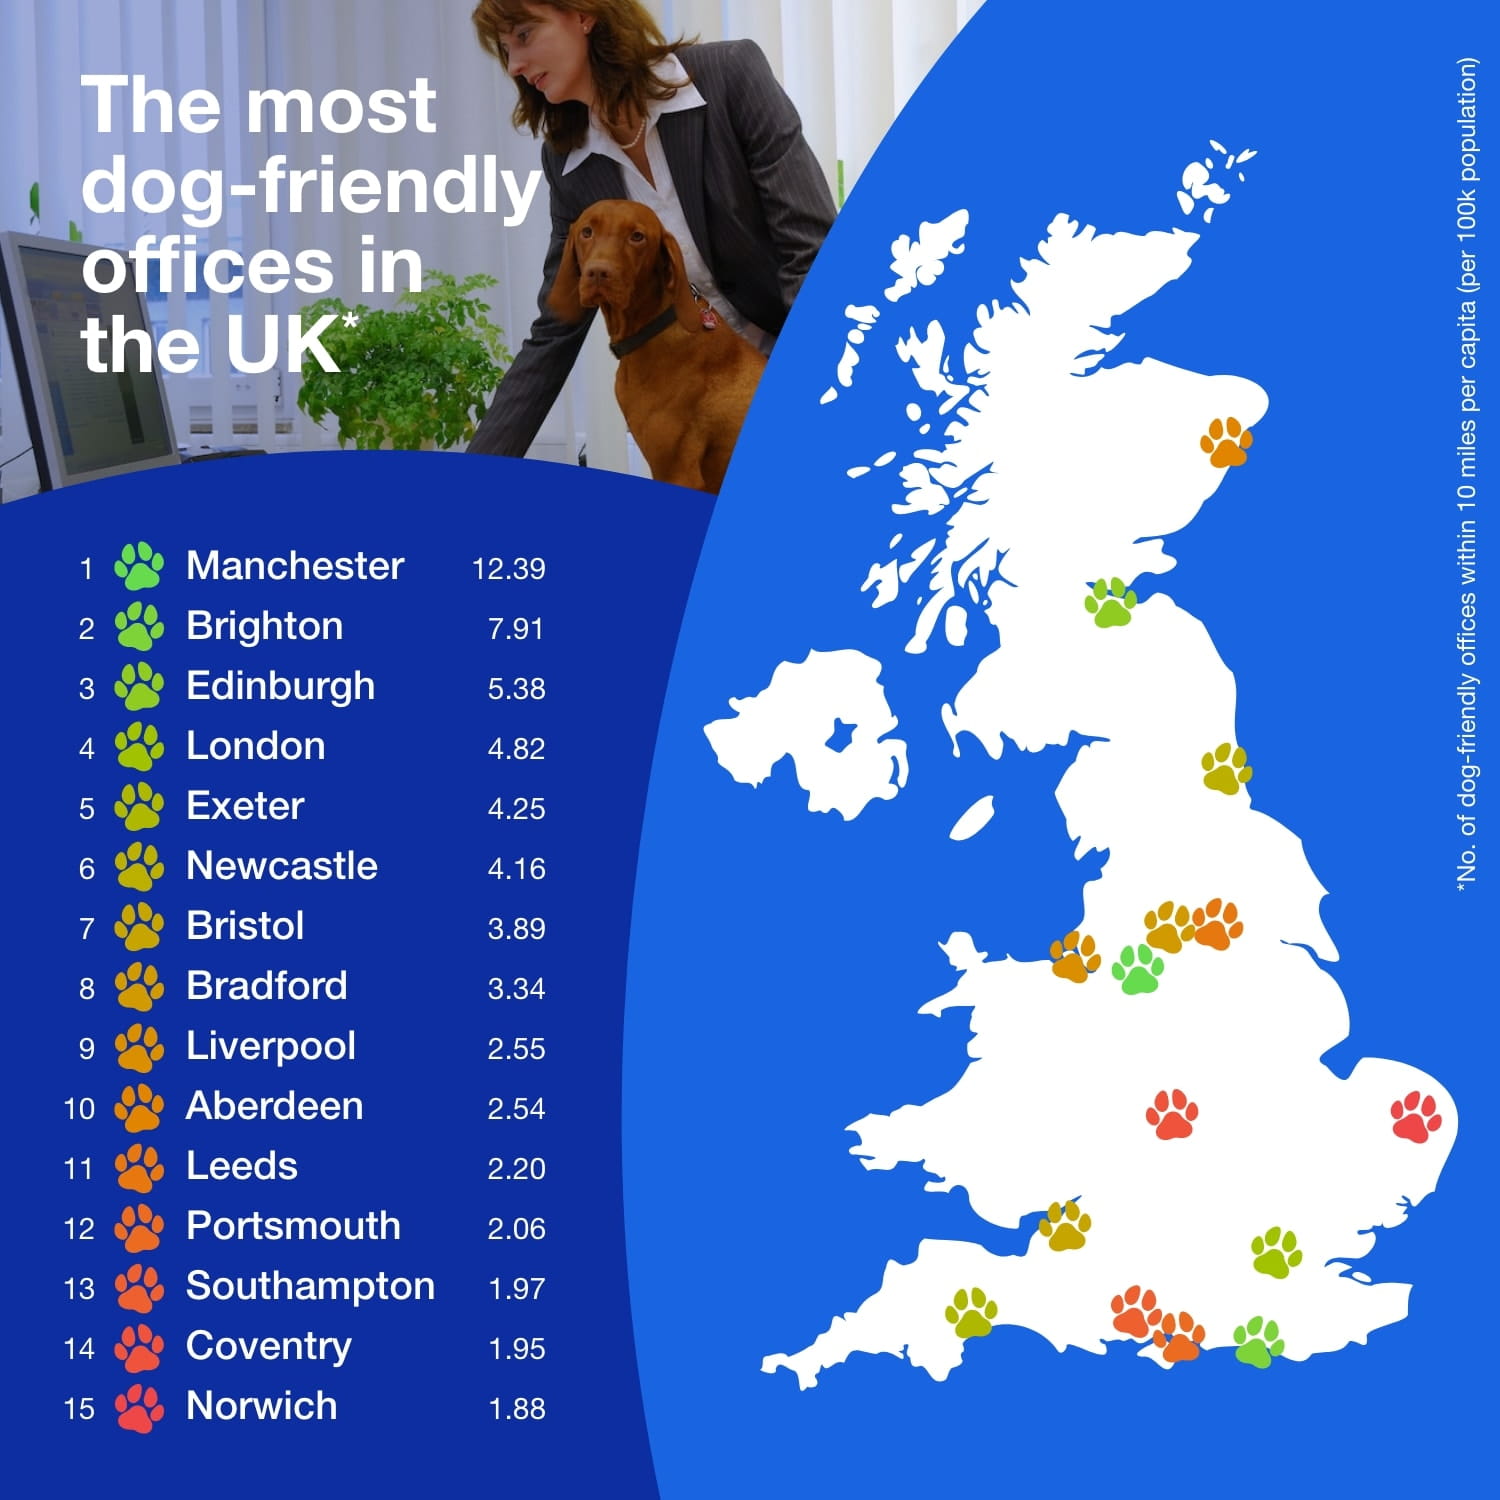 Infographic showing a map of the 15 most dog-friendly offices in the UK